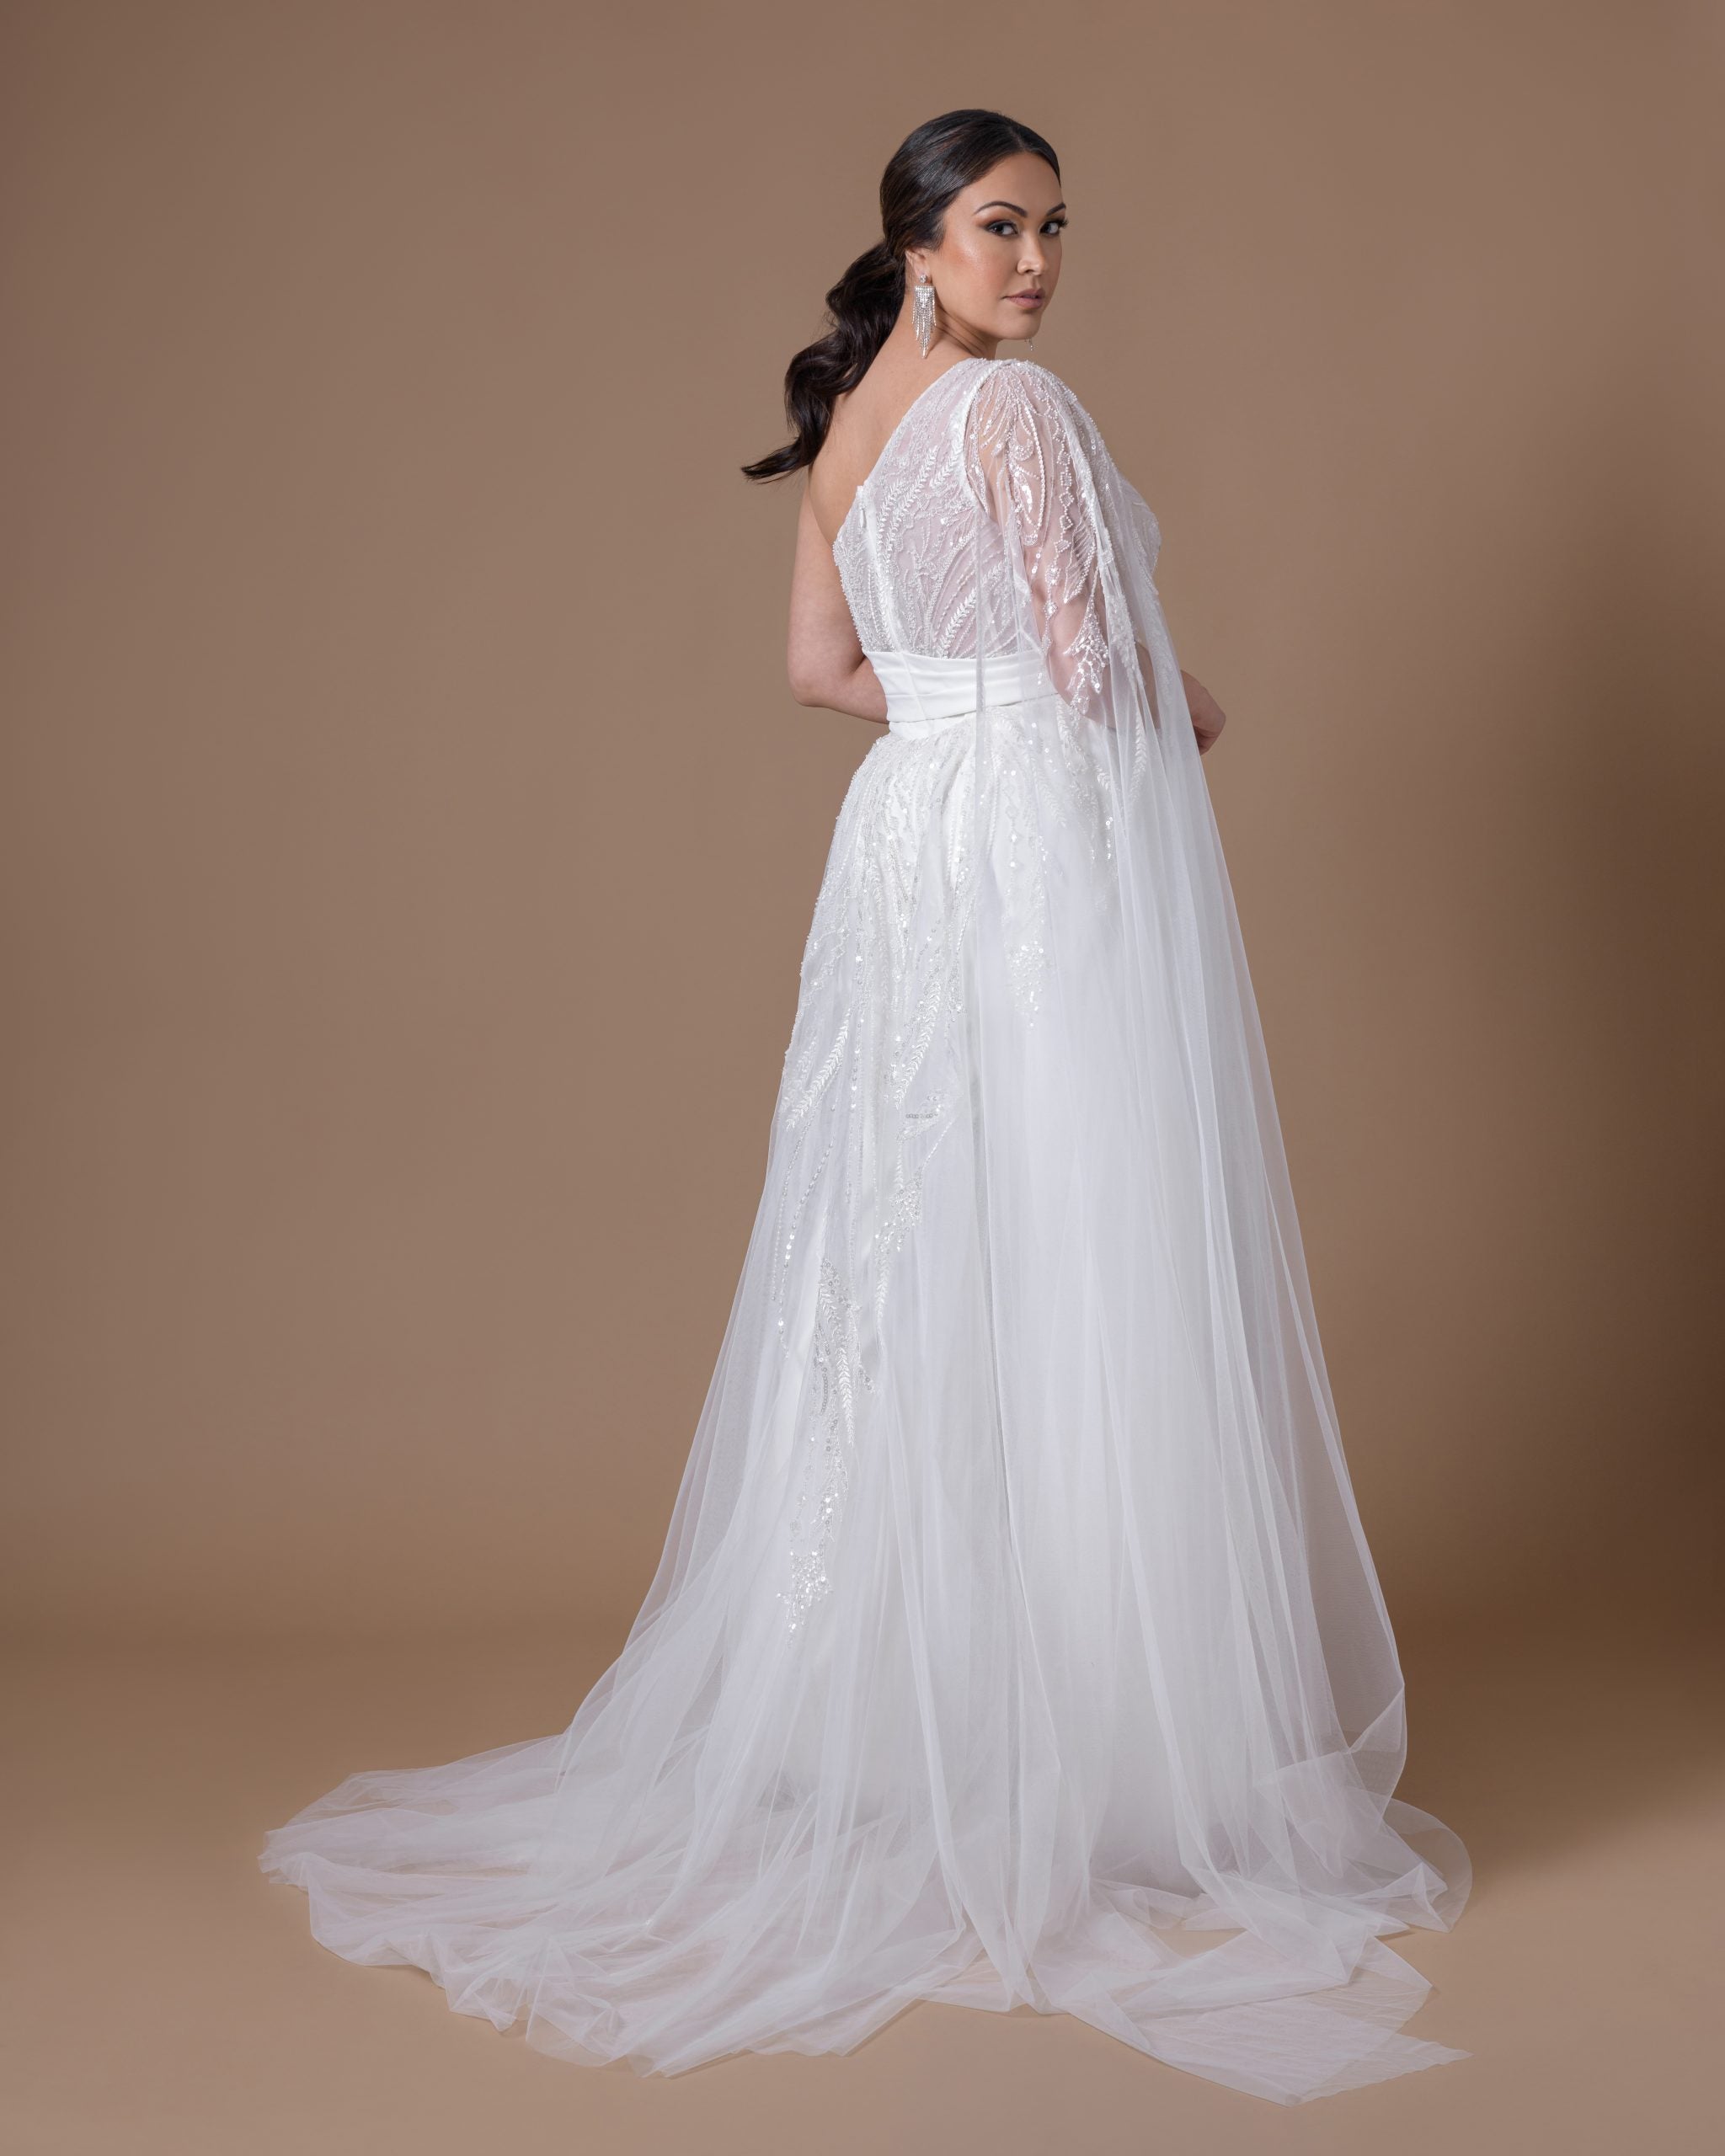 One Shoulder A-line Tulle Wedding Dress by Dany Girl - Image 2